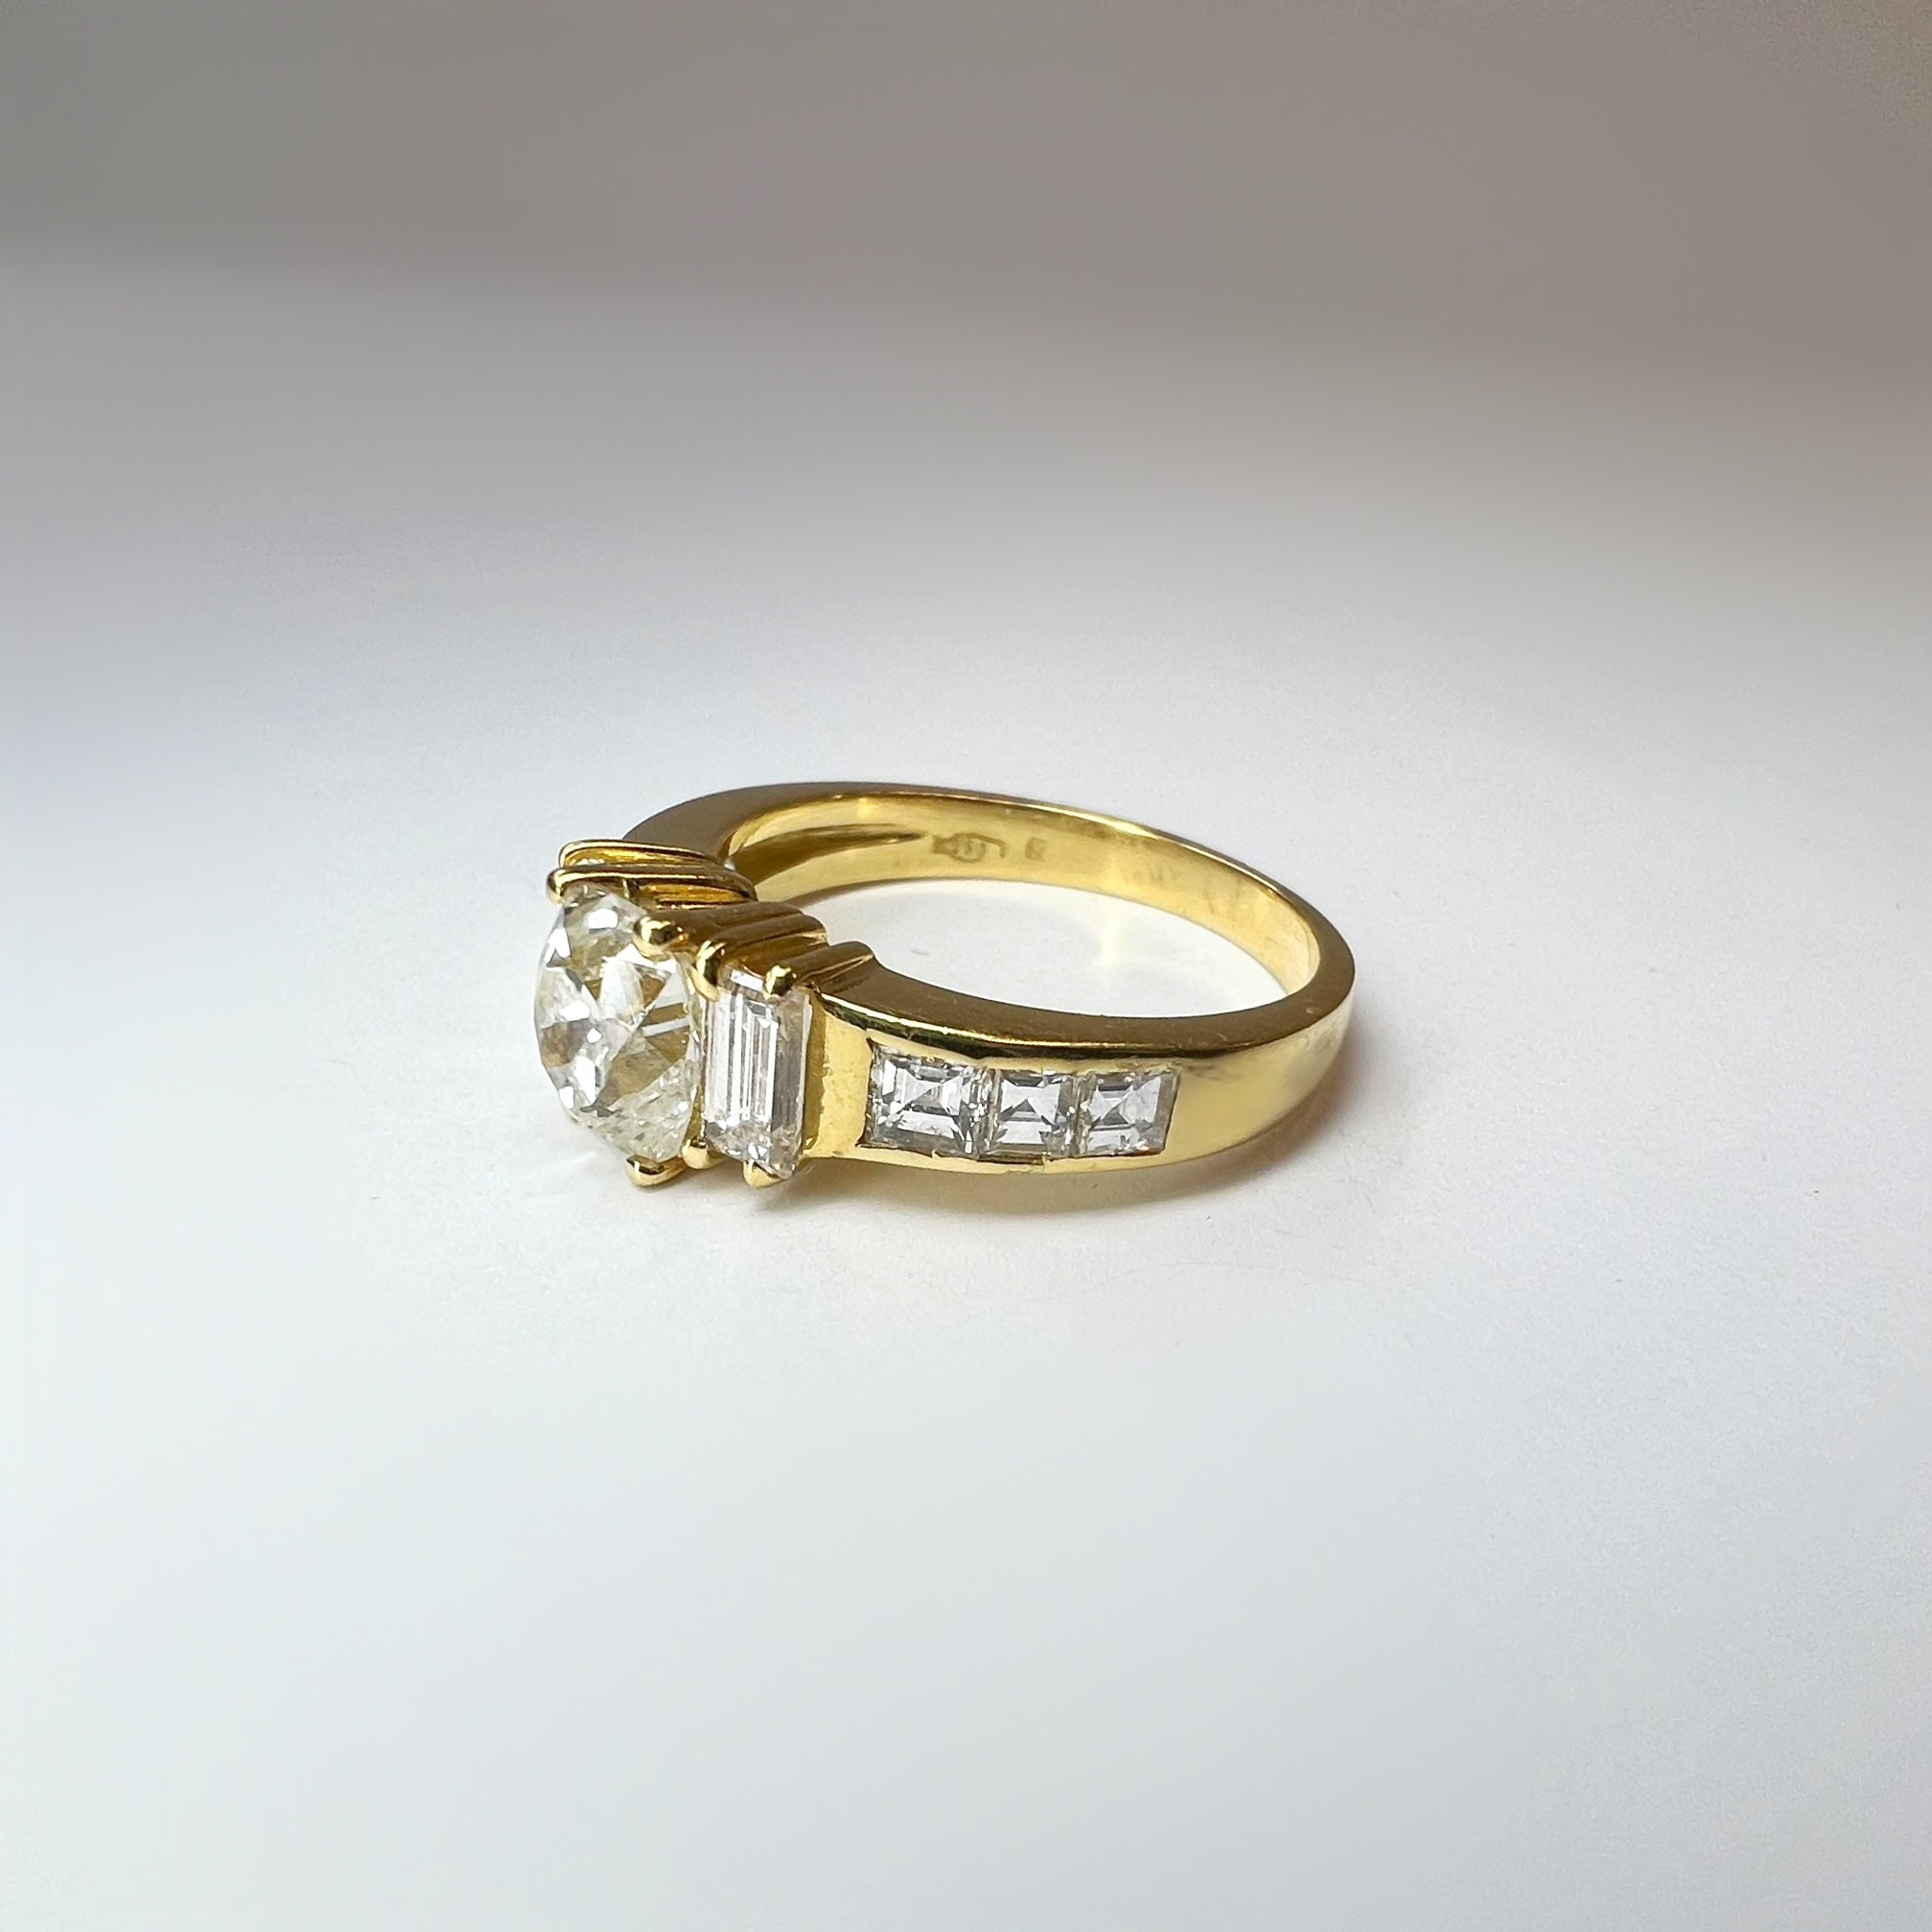 1.92ct Old Cut Diamond Ring with Diamond Baguette Shoulders